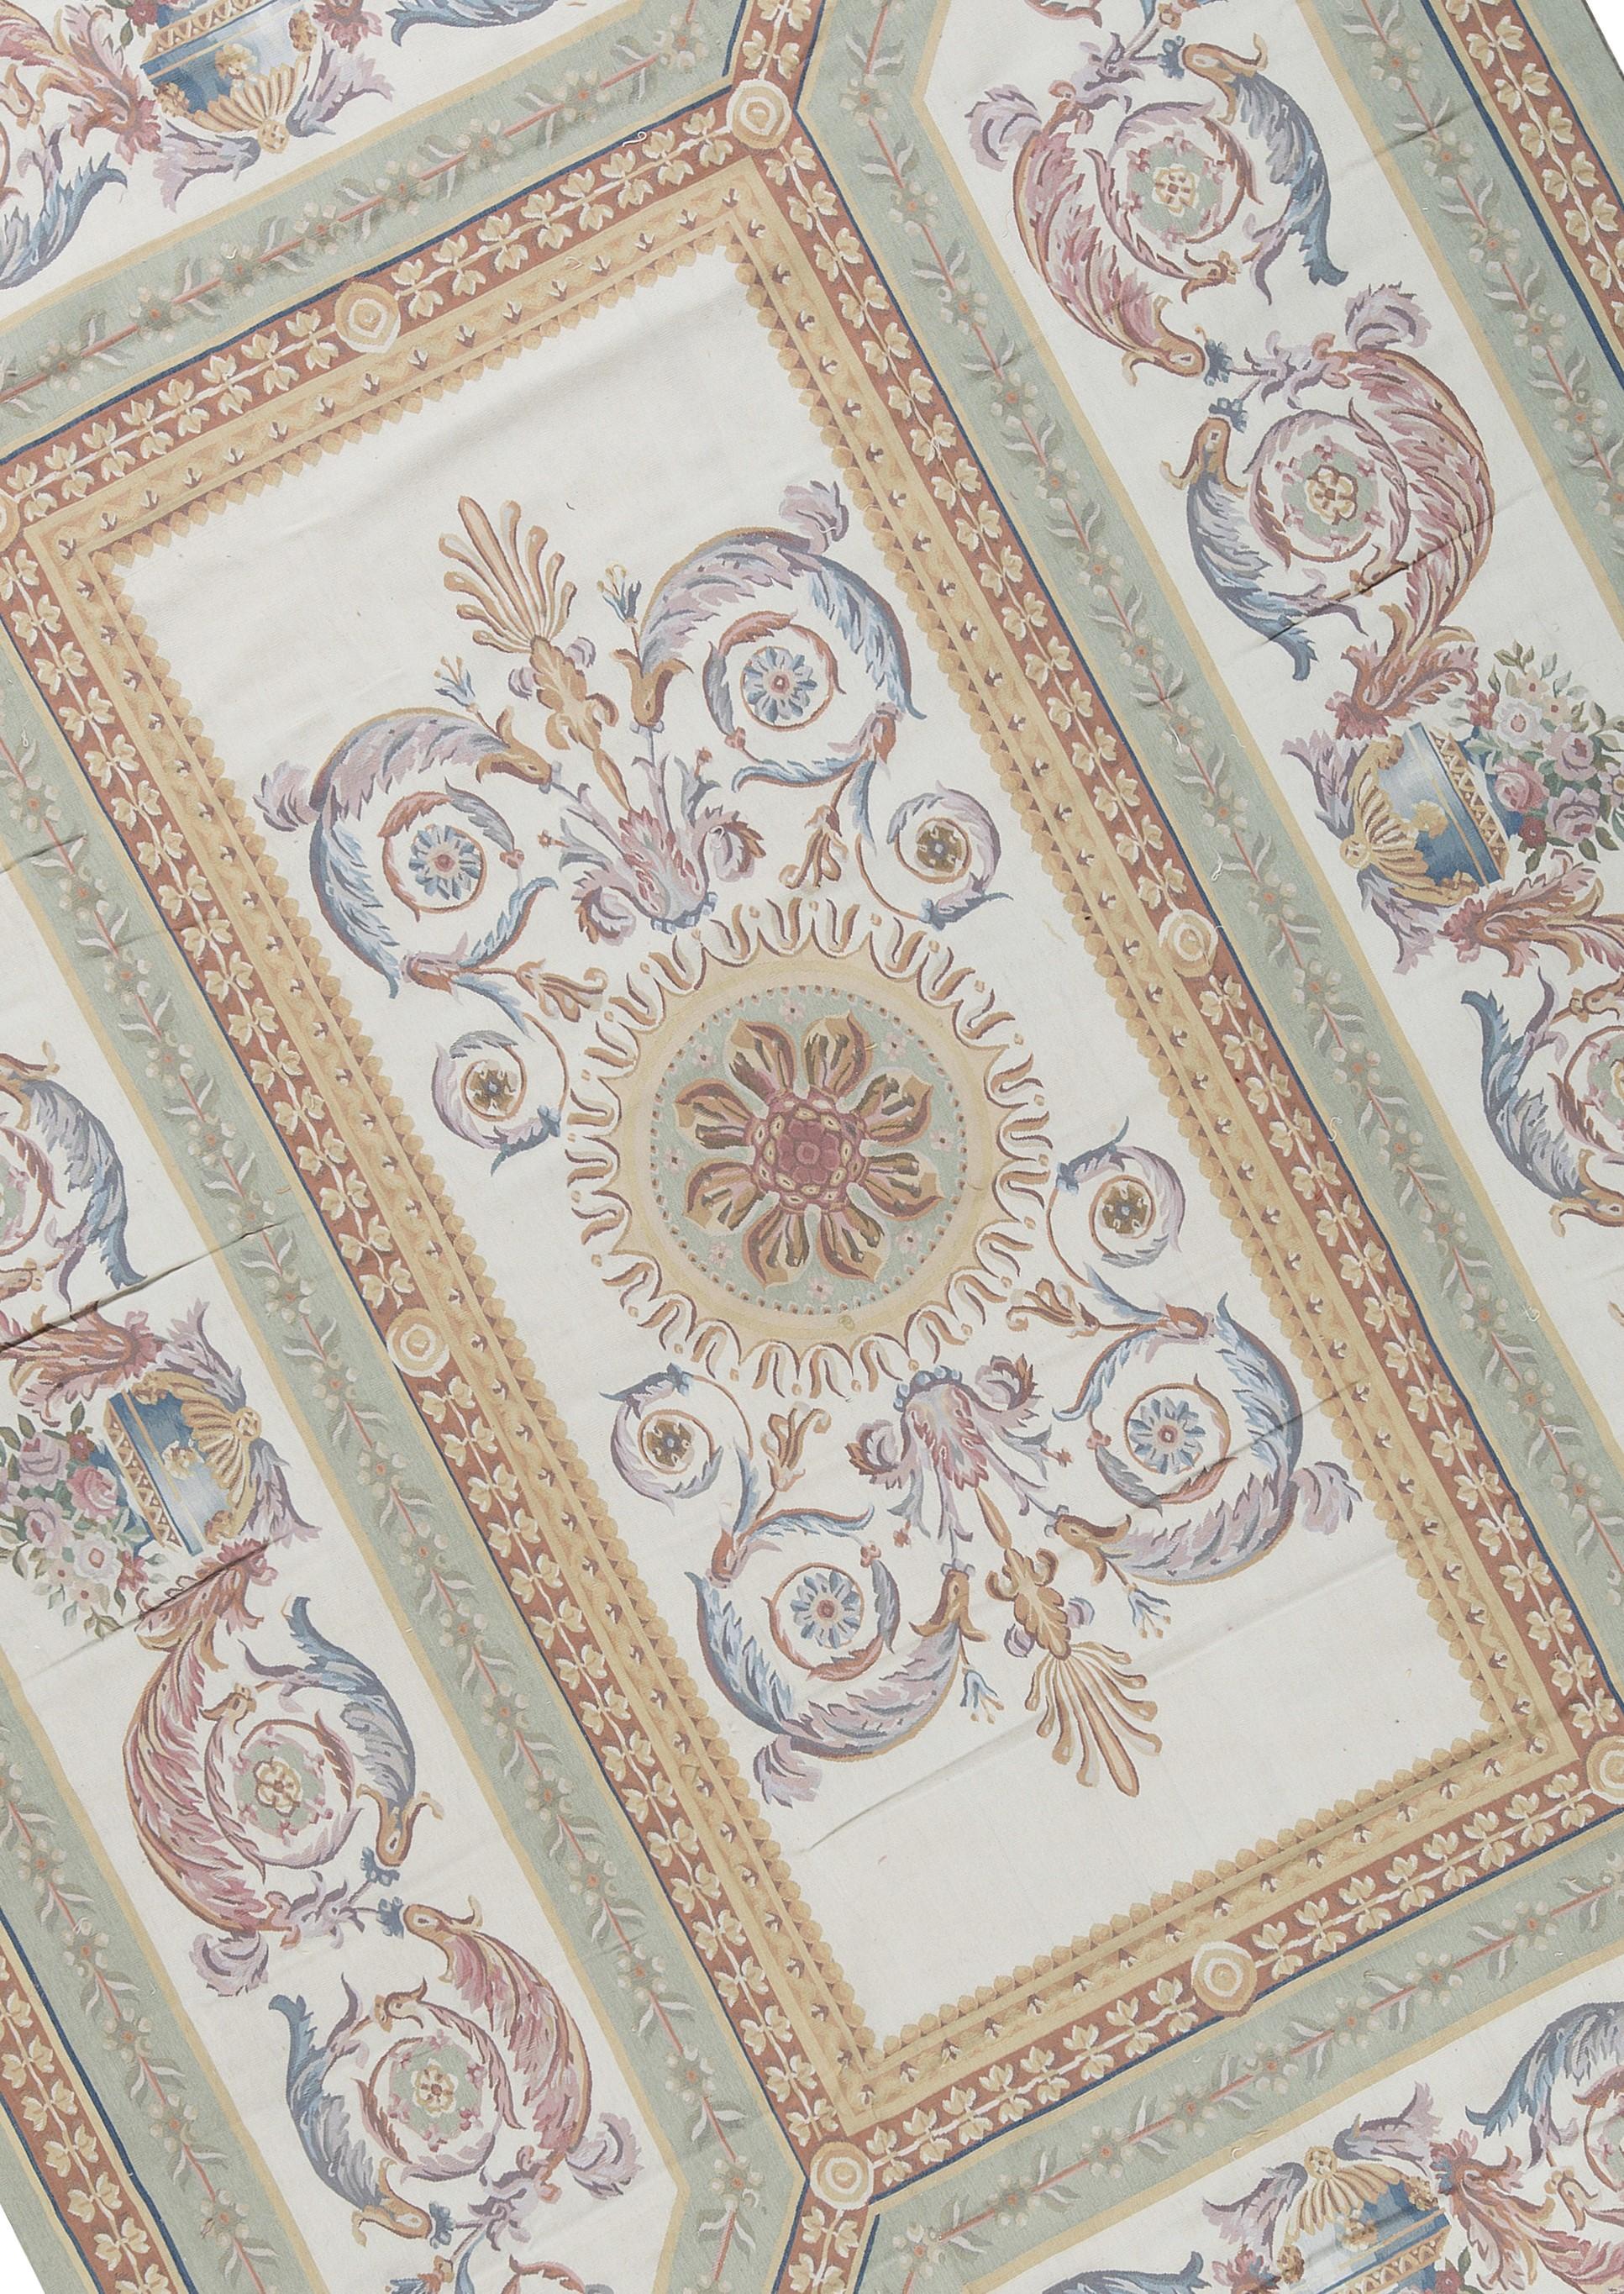 Handwoven Recreation of the Classic French flat-weave Aubusson rugs that have been found in the finest homes and palaces since the late 17th century. Size 11' 2'' x 15' 11''.